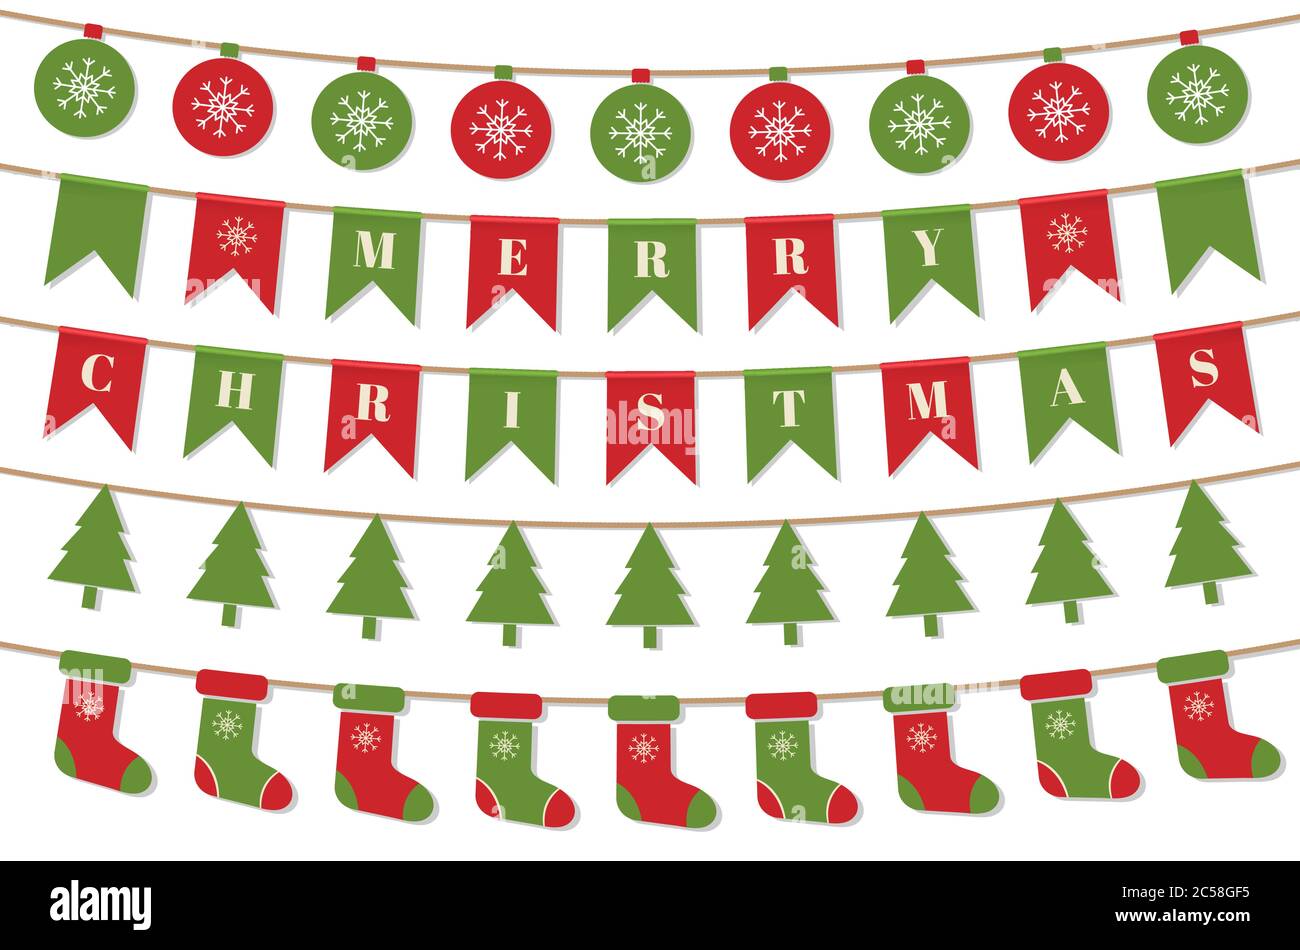 Bright Christmas garlands. Merry Christmas background with xmas bunting flags, balls, christmas trees, socks. Winter holiday design. Vector Stock Vector